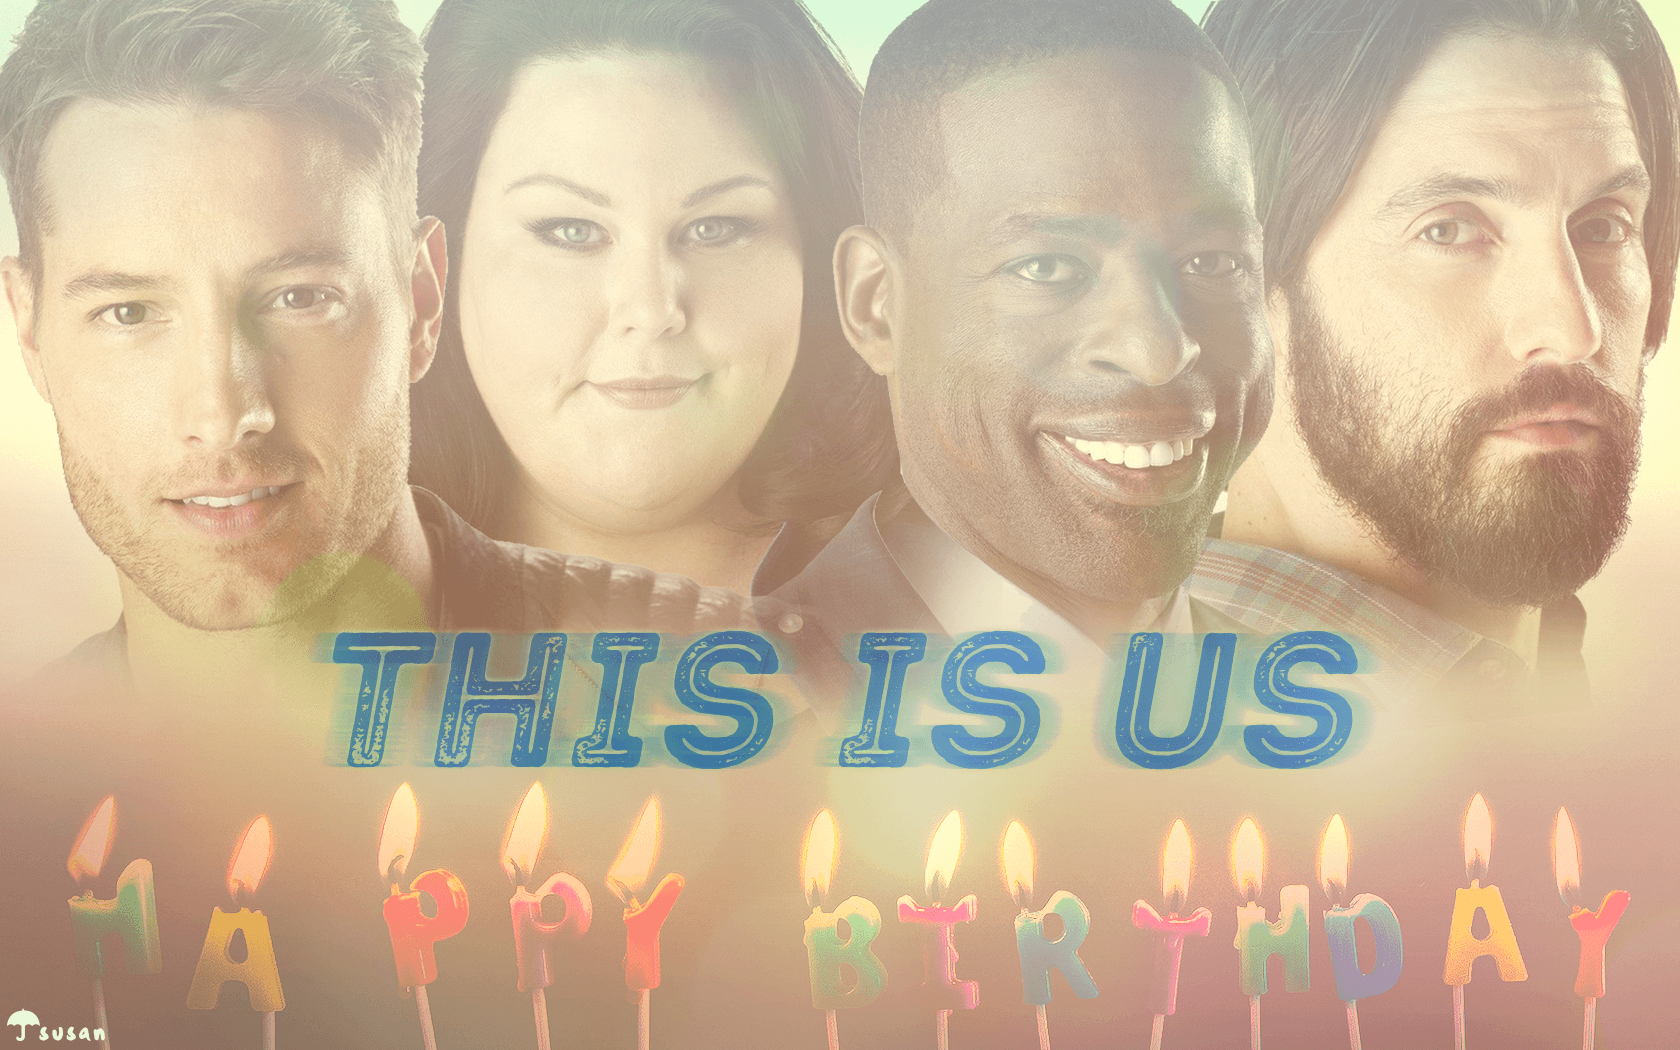 WALLPAPER: Happy Birthday (This Is Us)